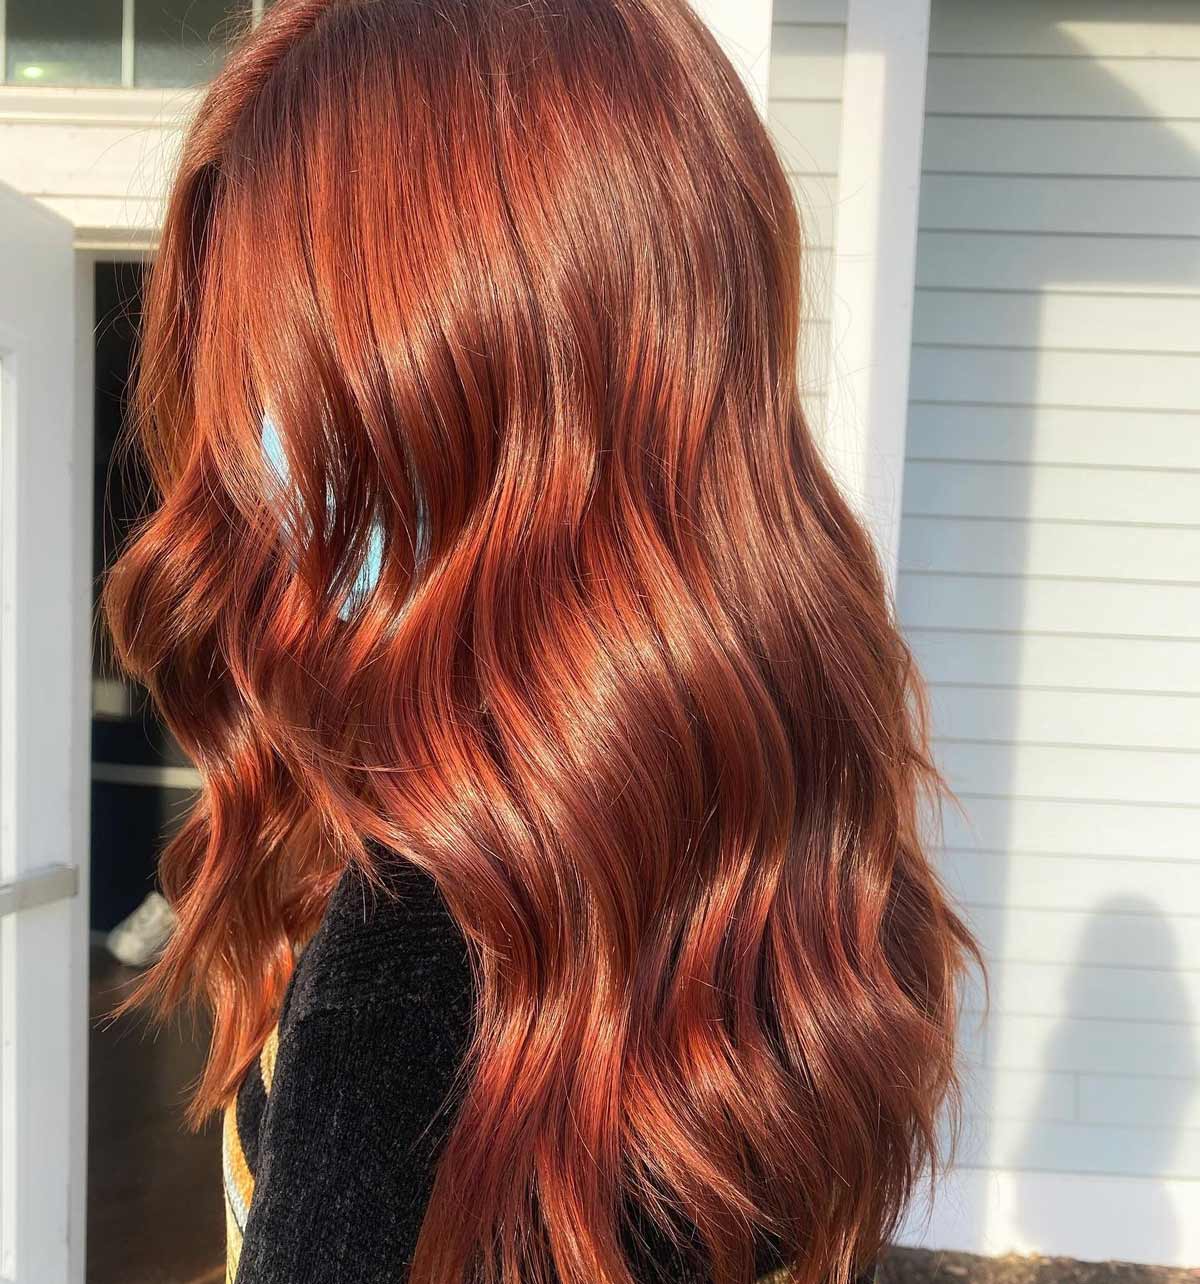 14 Fun Hair Colors To Try If You Want a Hint of Red Hair Color